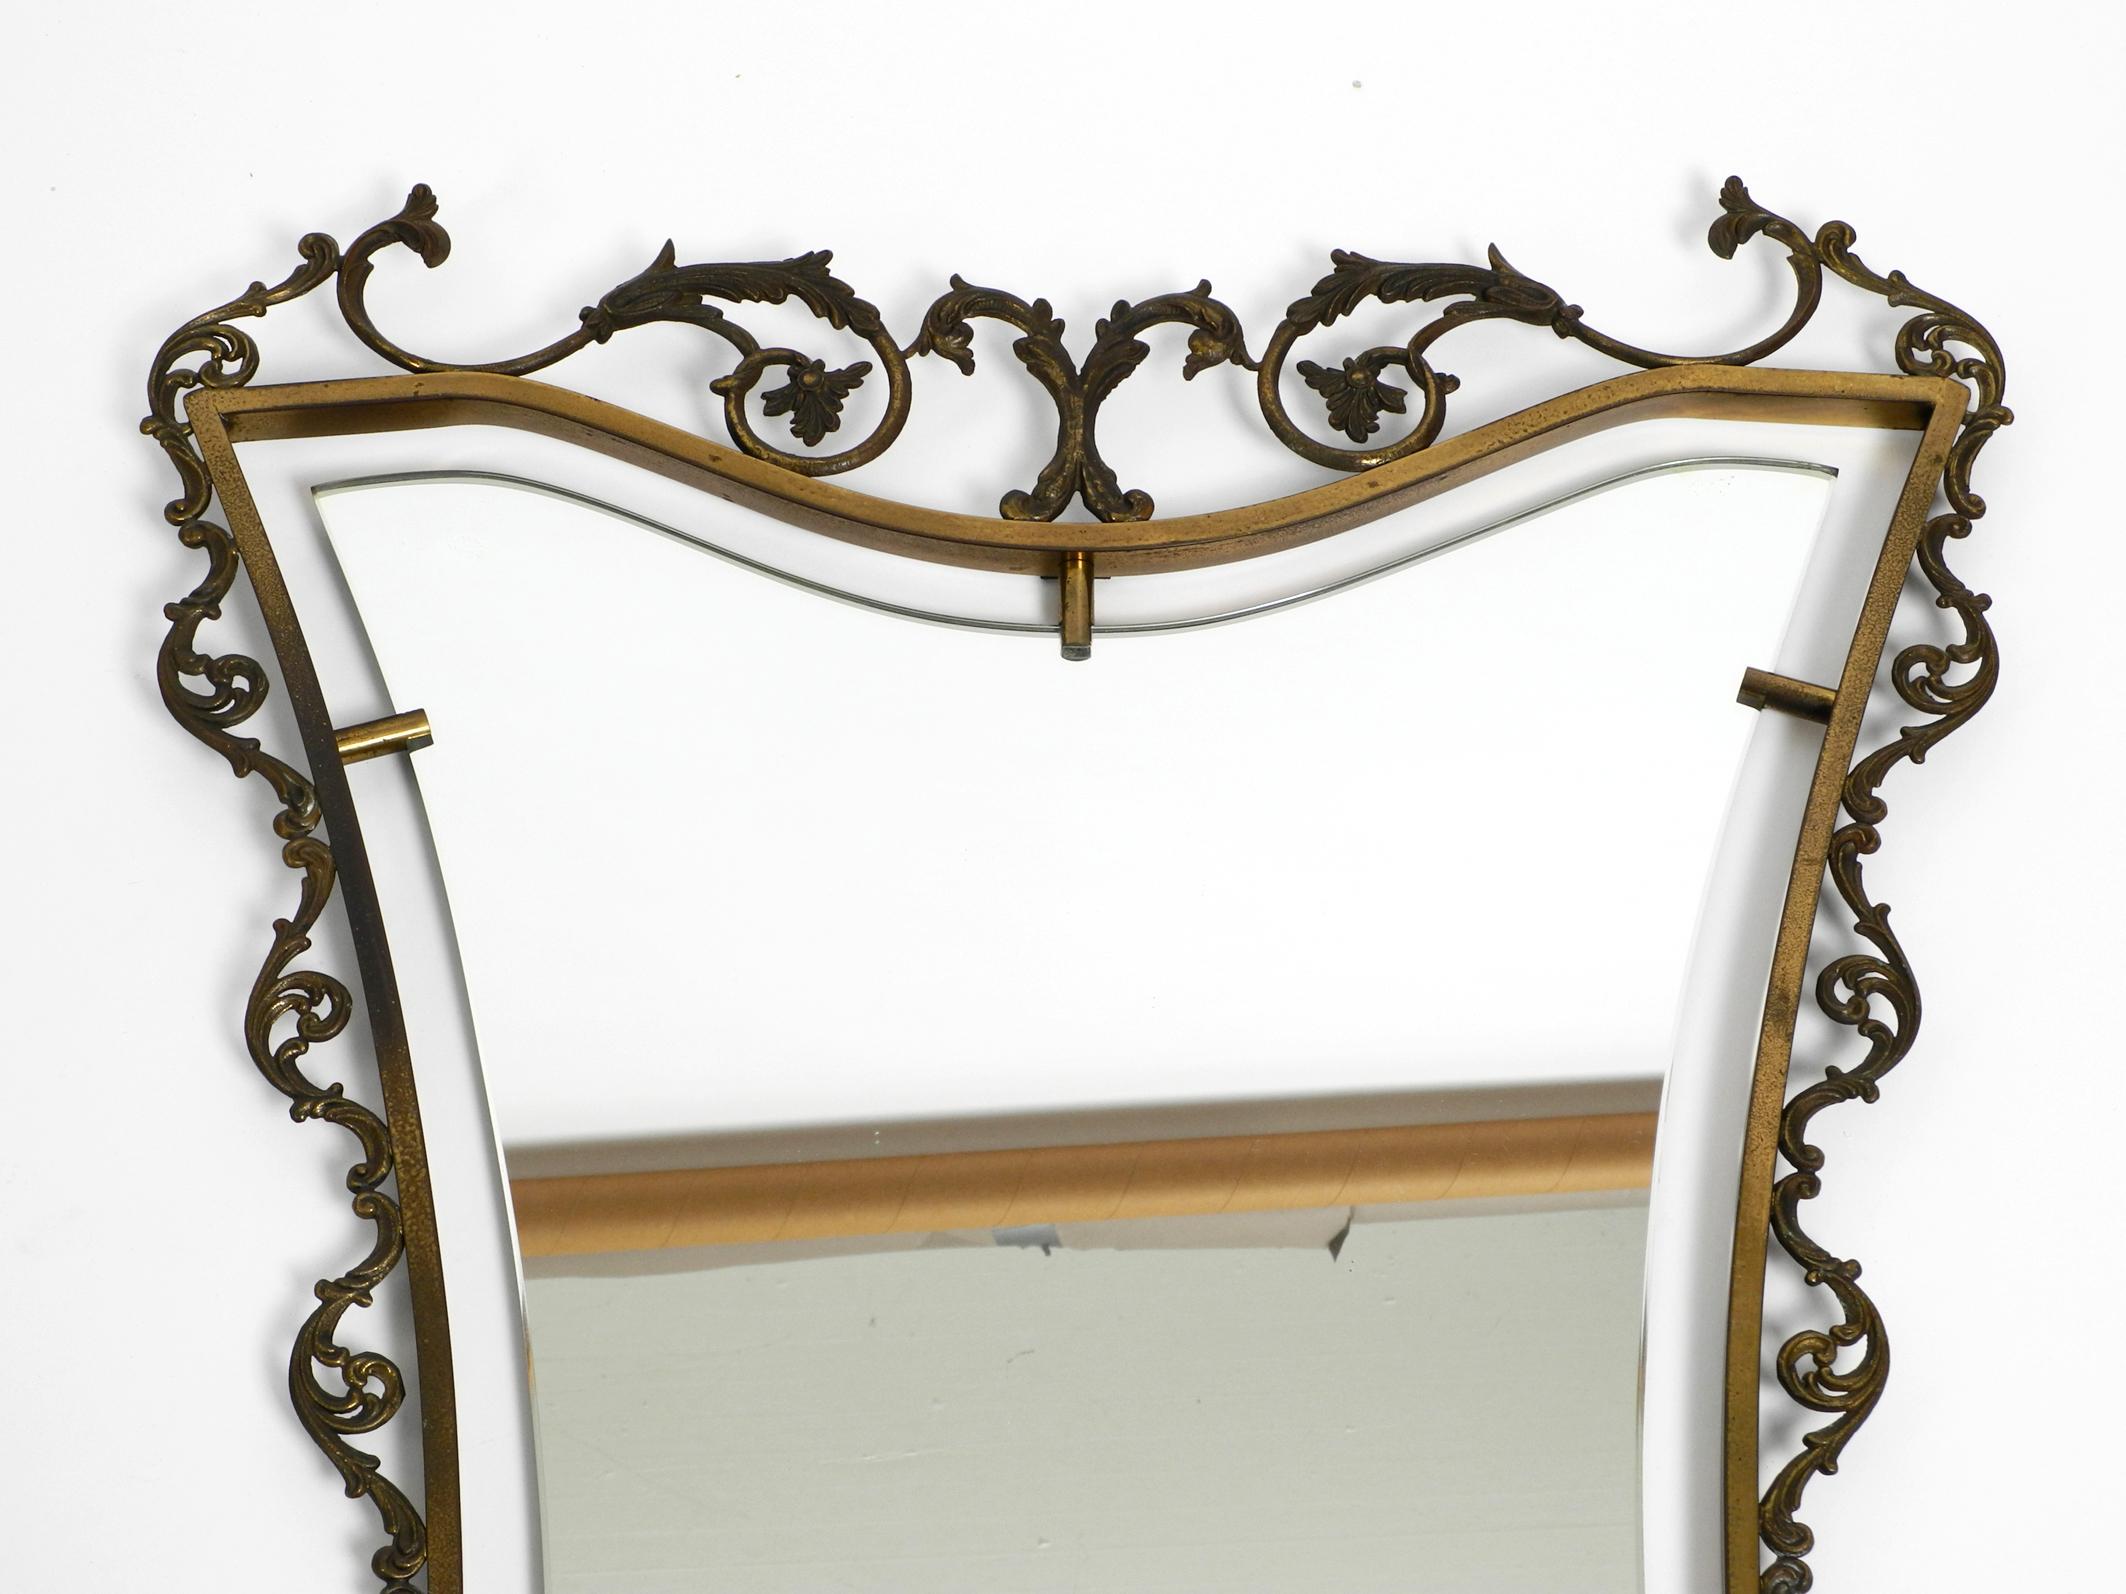 Extraordinary Large, Heavy Italian Mid Century Wall Mirror with an Ornate Brass In Good Condition For Sale In München, DE